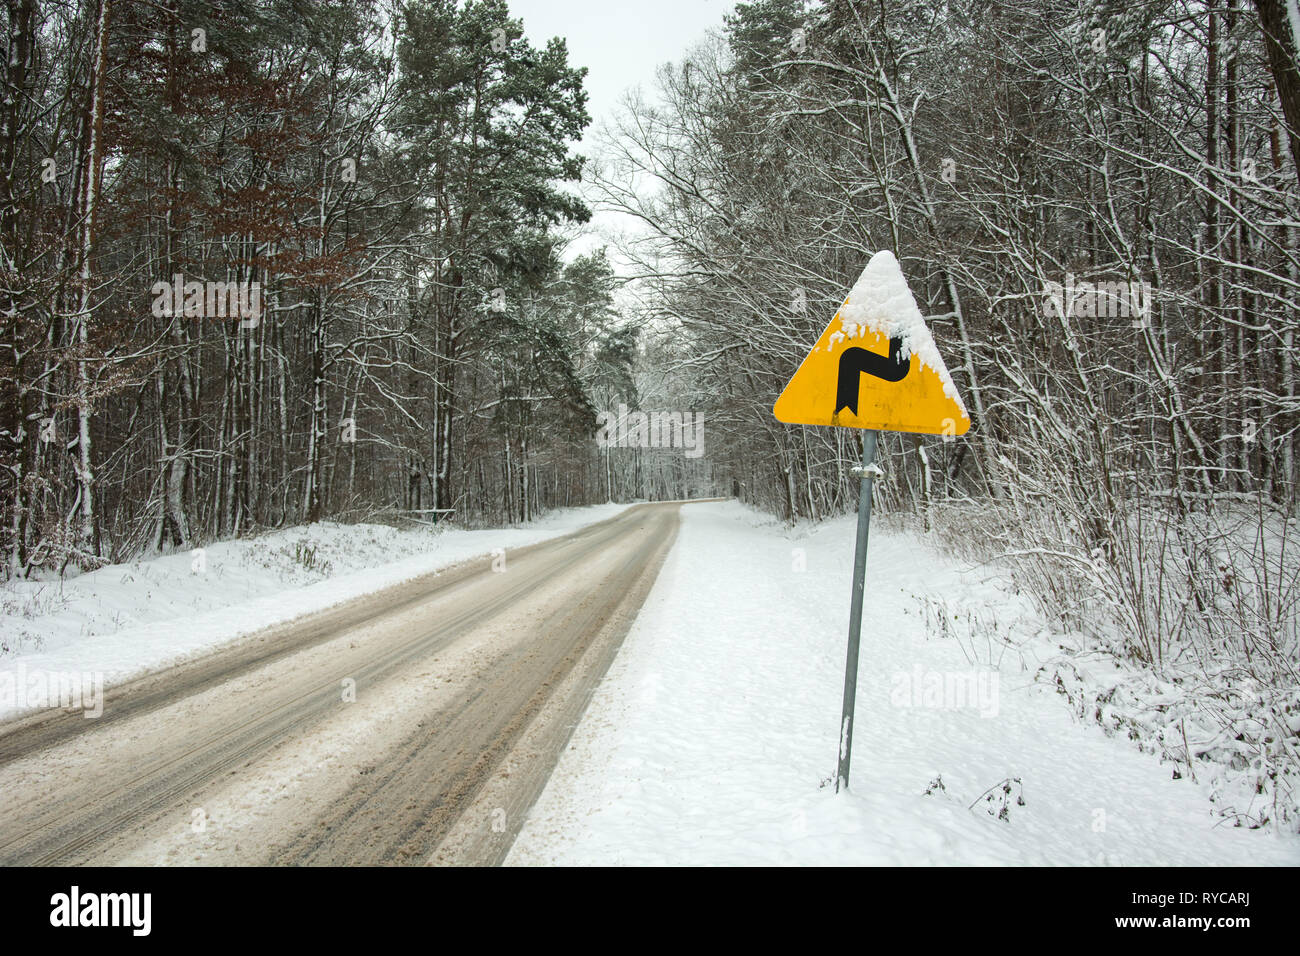 Yellow warning road sign - dangerous bends, first right - standing by the road through the forest - winter view Stock Photo